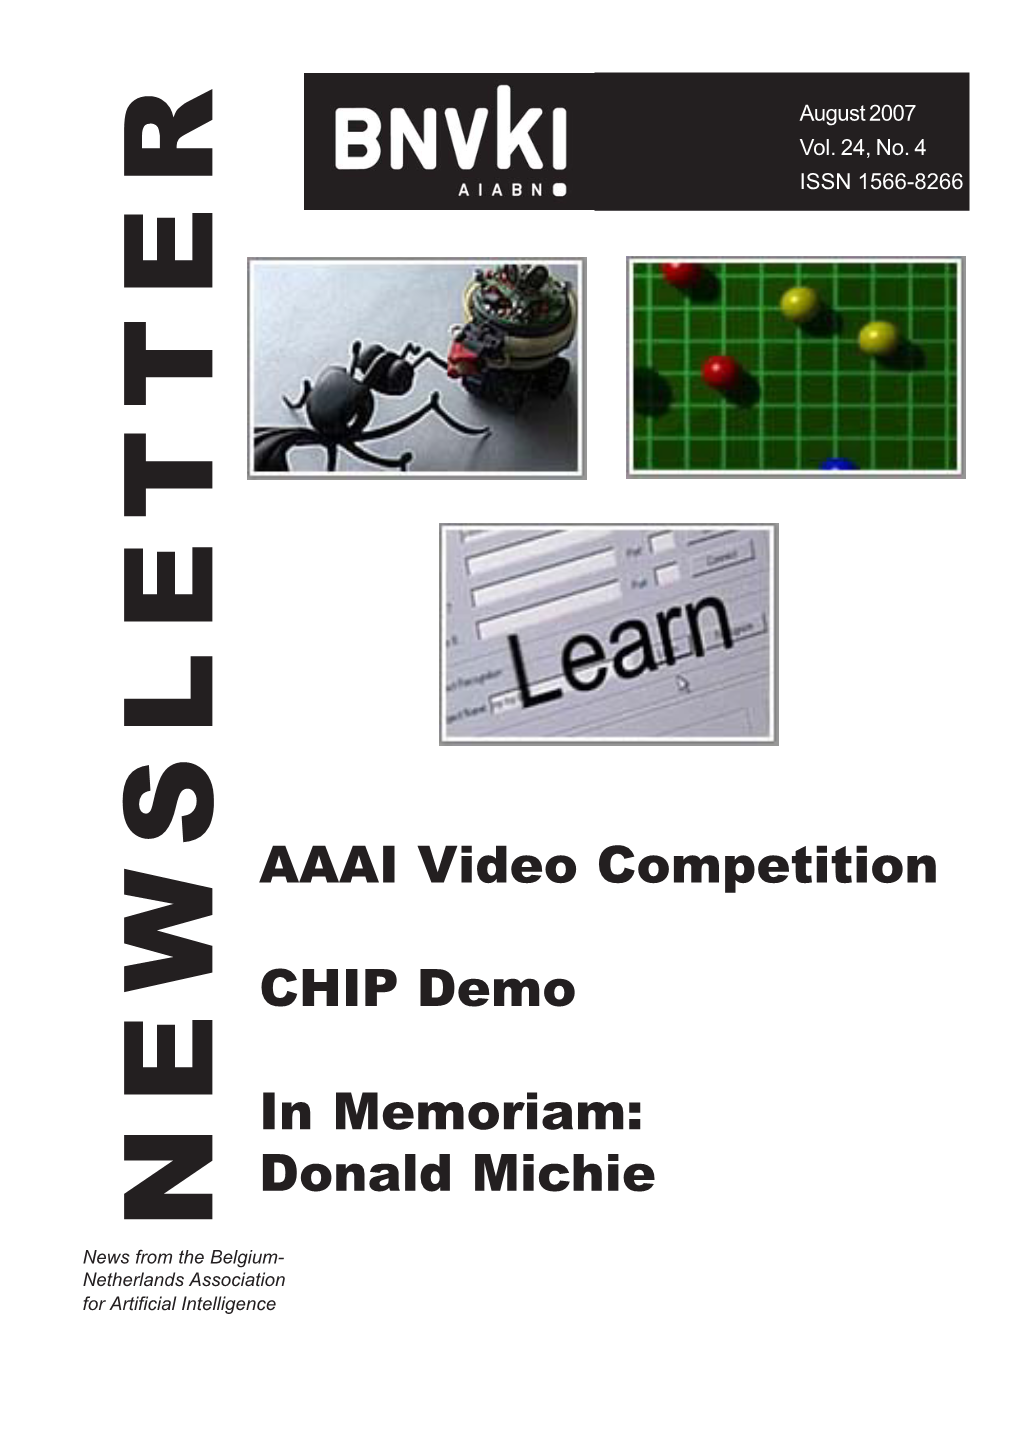 Donald Michie in Memoriam: CHIP Demo Competition AAAI Video ISSN 1566-8266 Vol